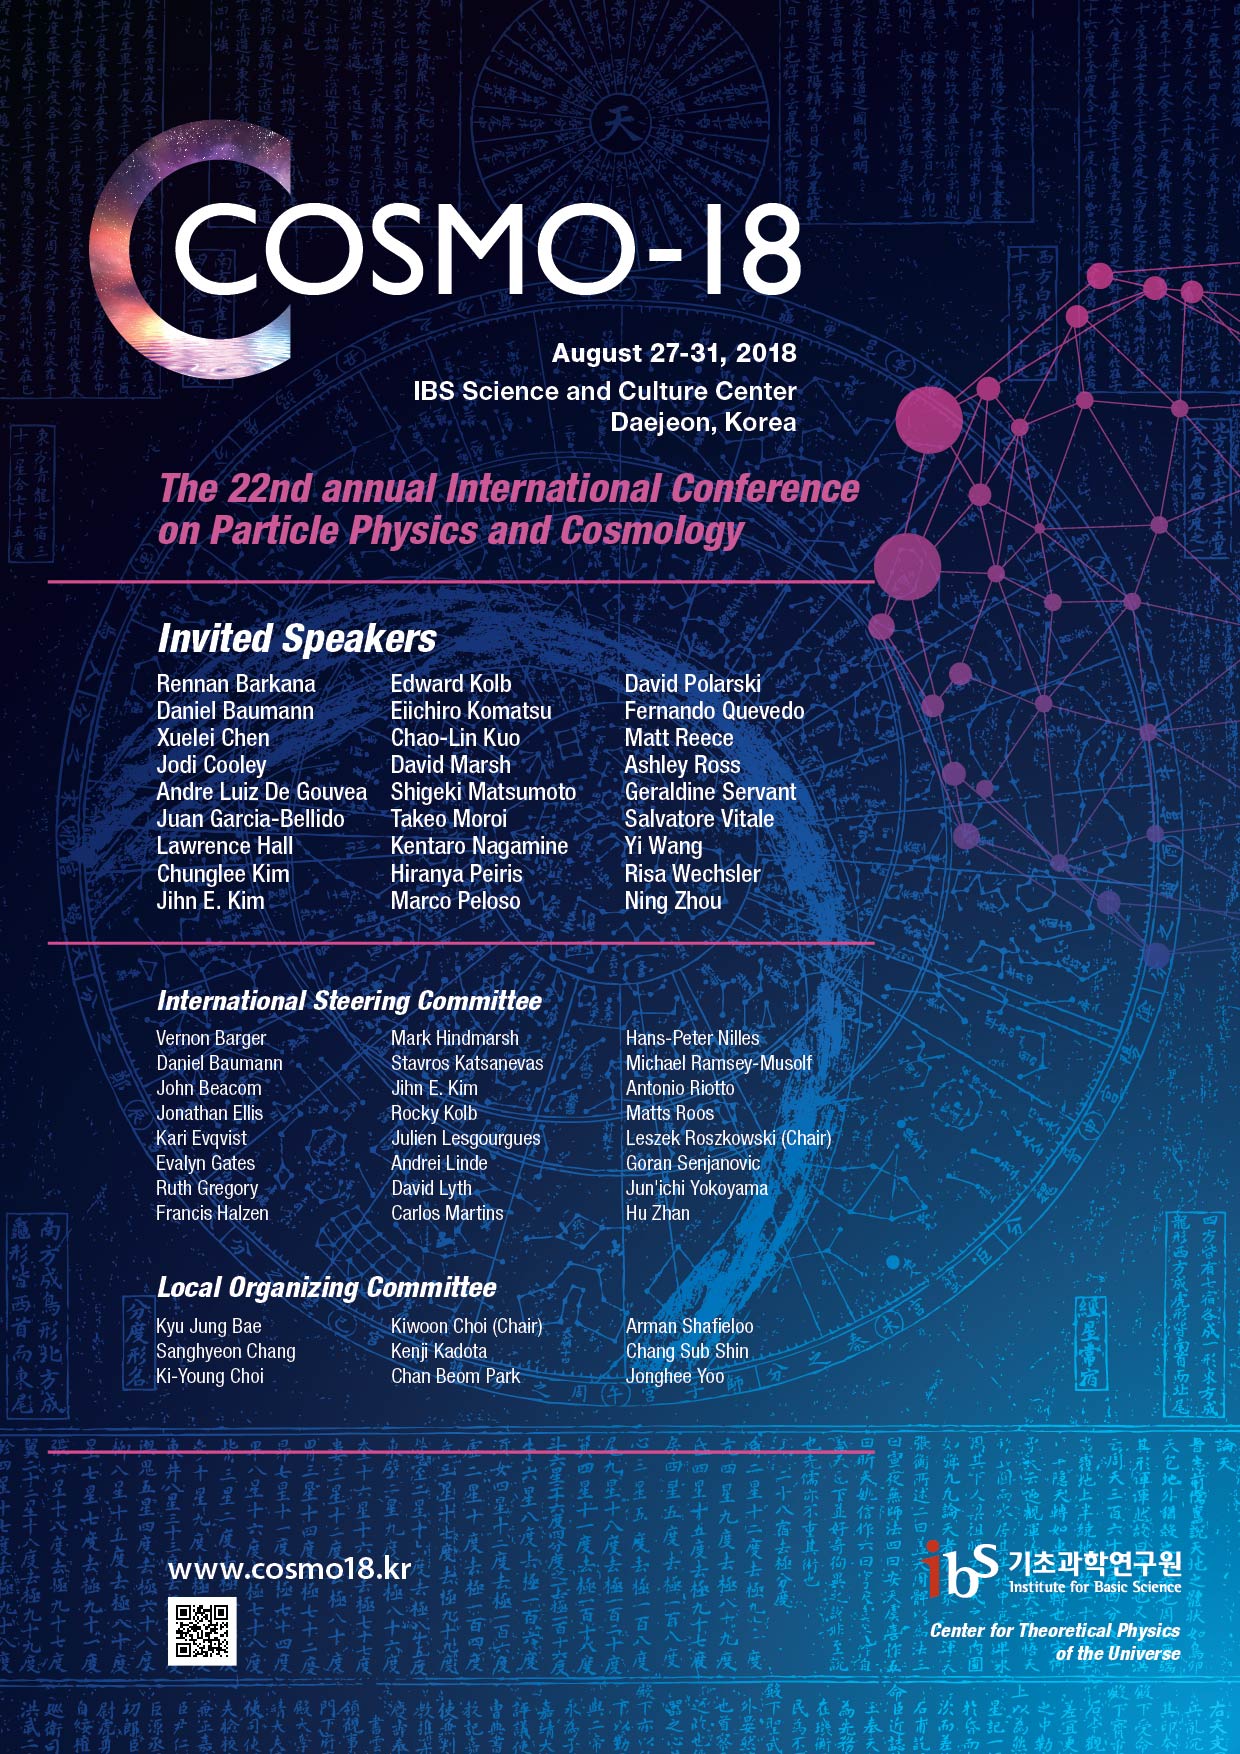 The 22nd annual International Conference on Particle Physics and Cosmology (COSMO-18)